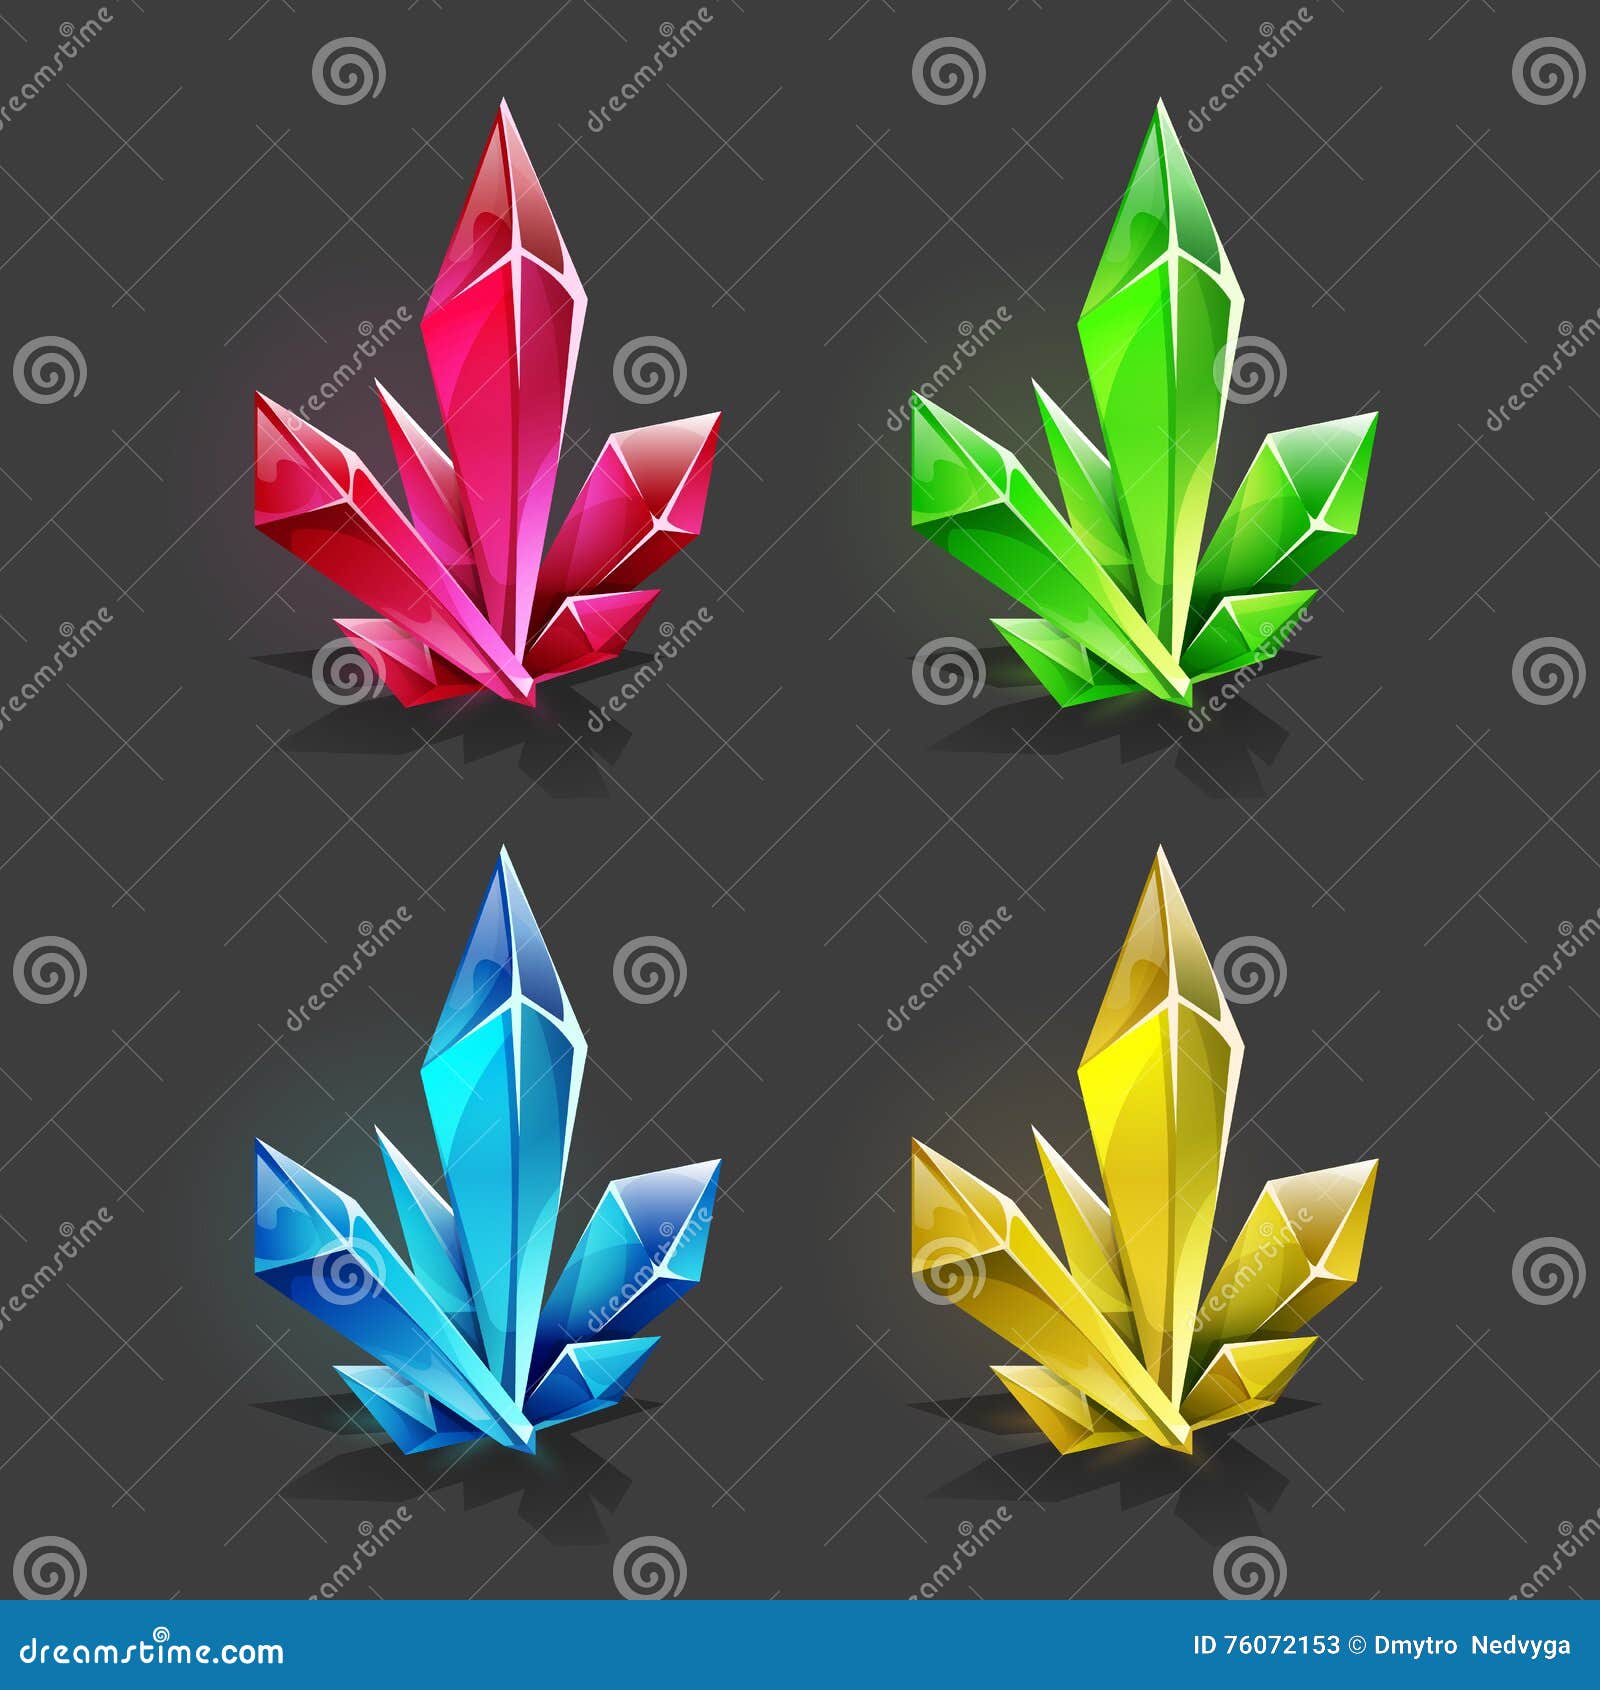 set of different game resources cartoon crystals.